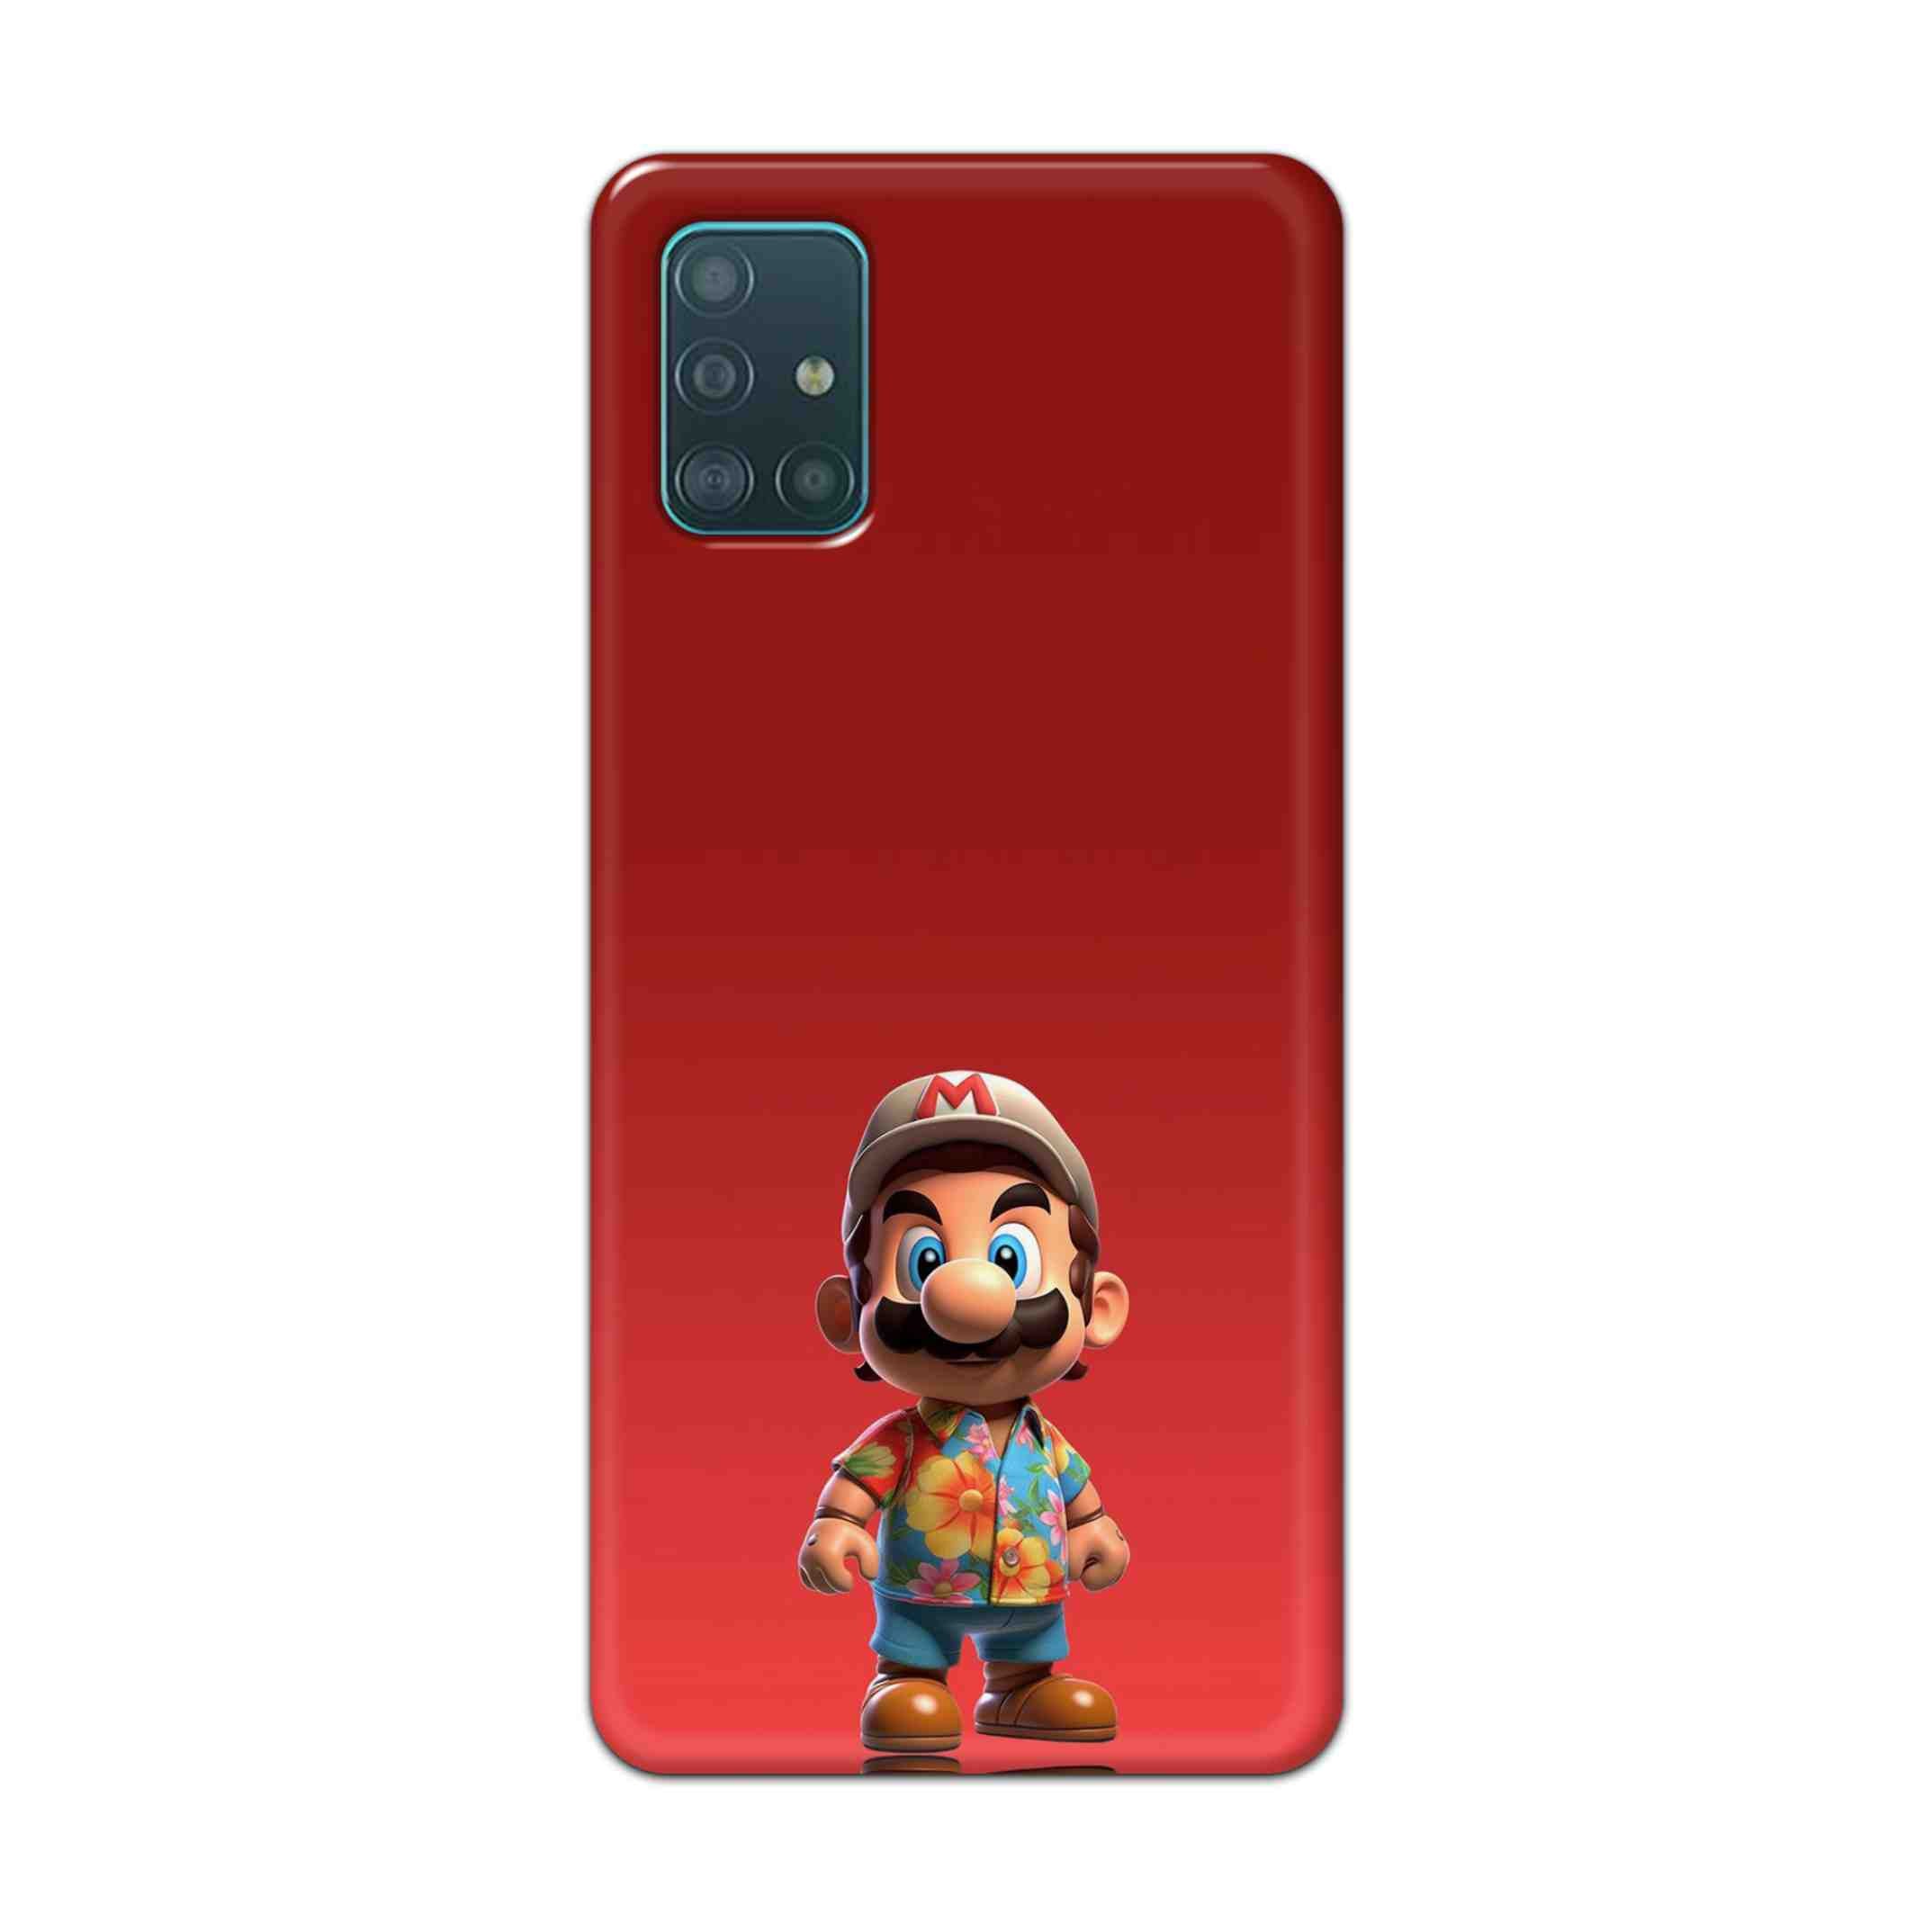 Buy Mario Hard Back Mobile Phone Case Cover For Samsung A51 Online